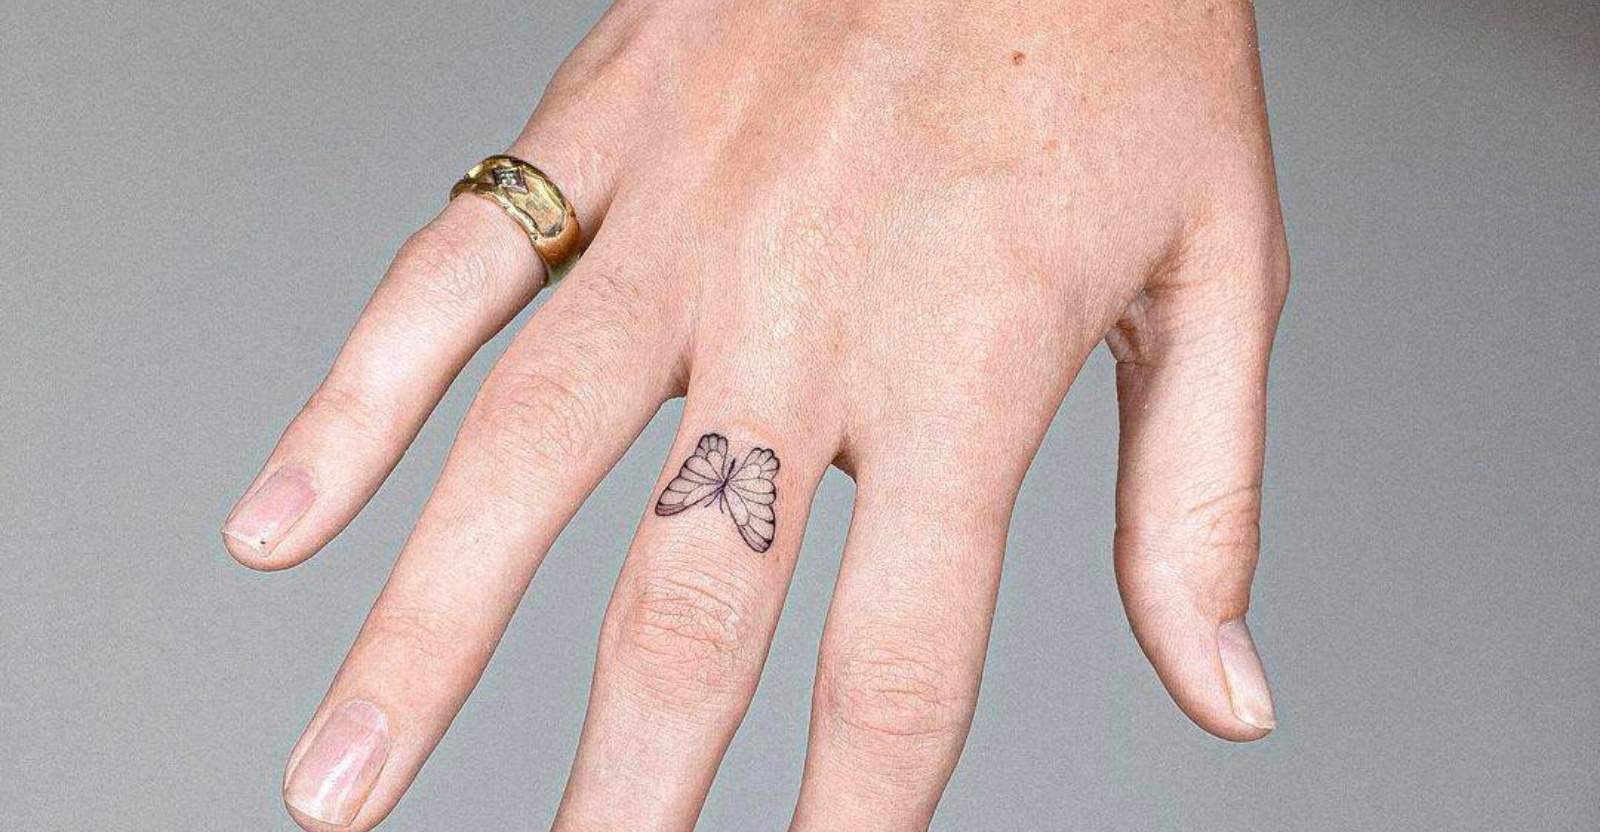 hands and fingers tattoos - the black hat tattoo